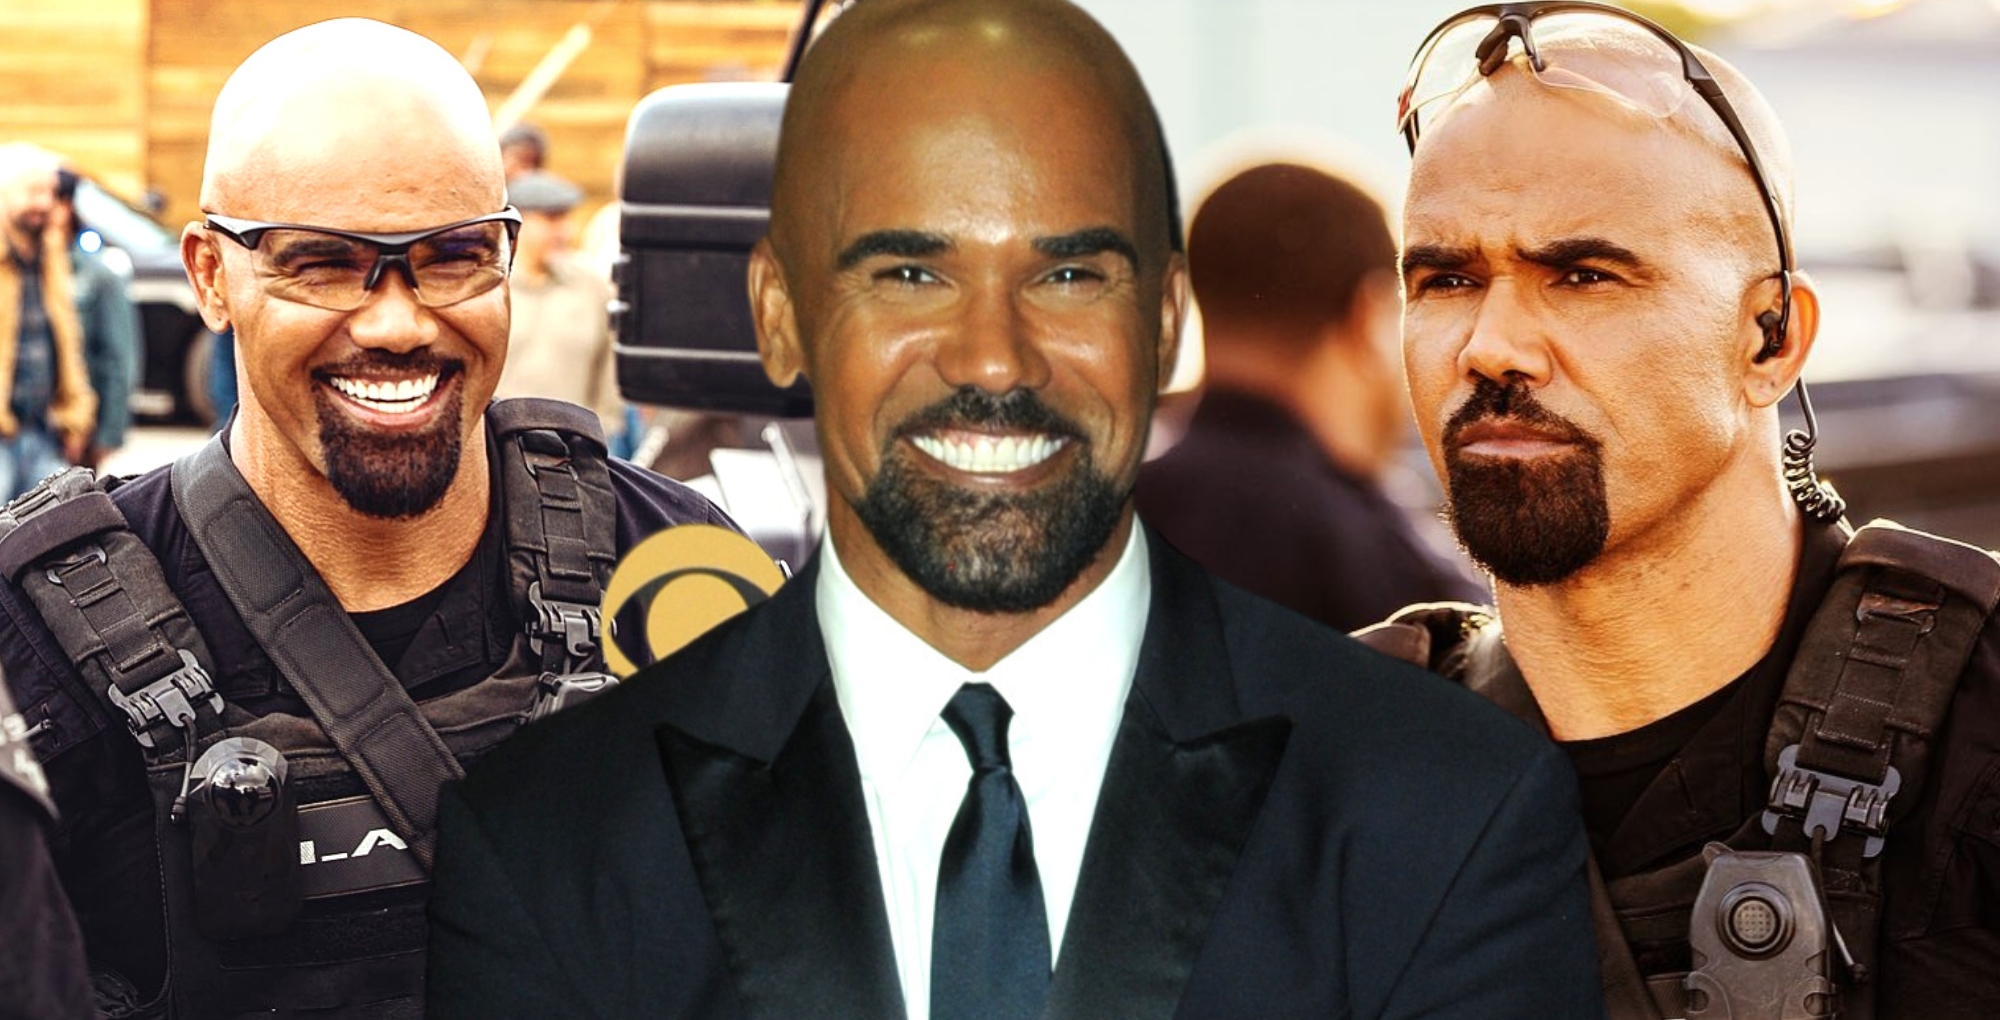 collage of photos of shemar moore acting on s.w.a.t. and a shot of the actor dressed up.